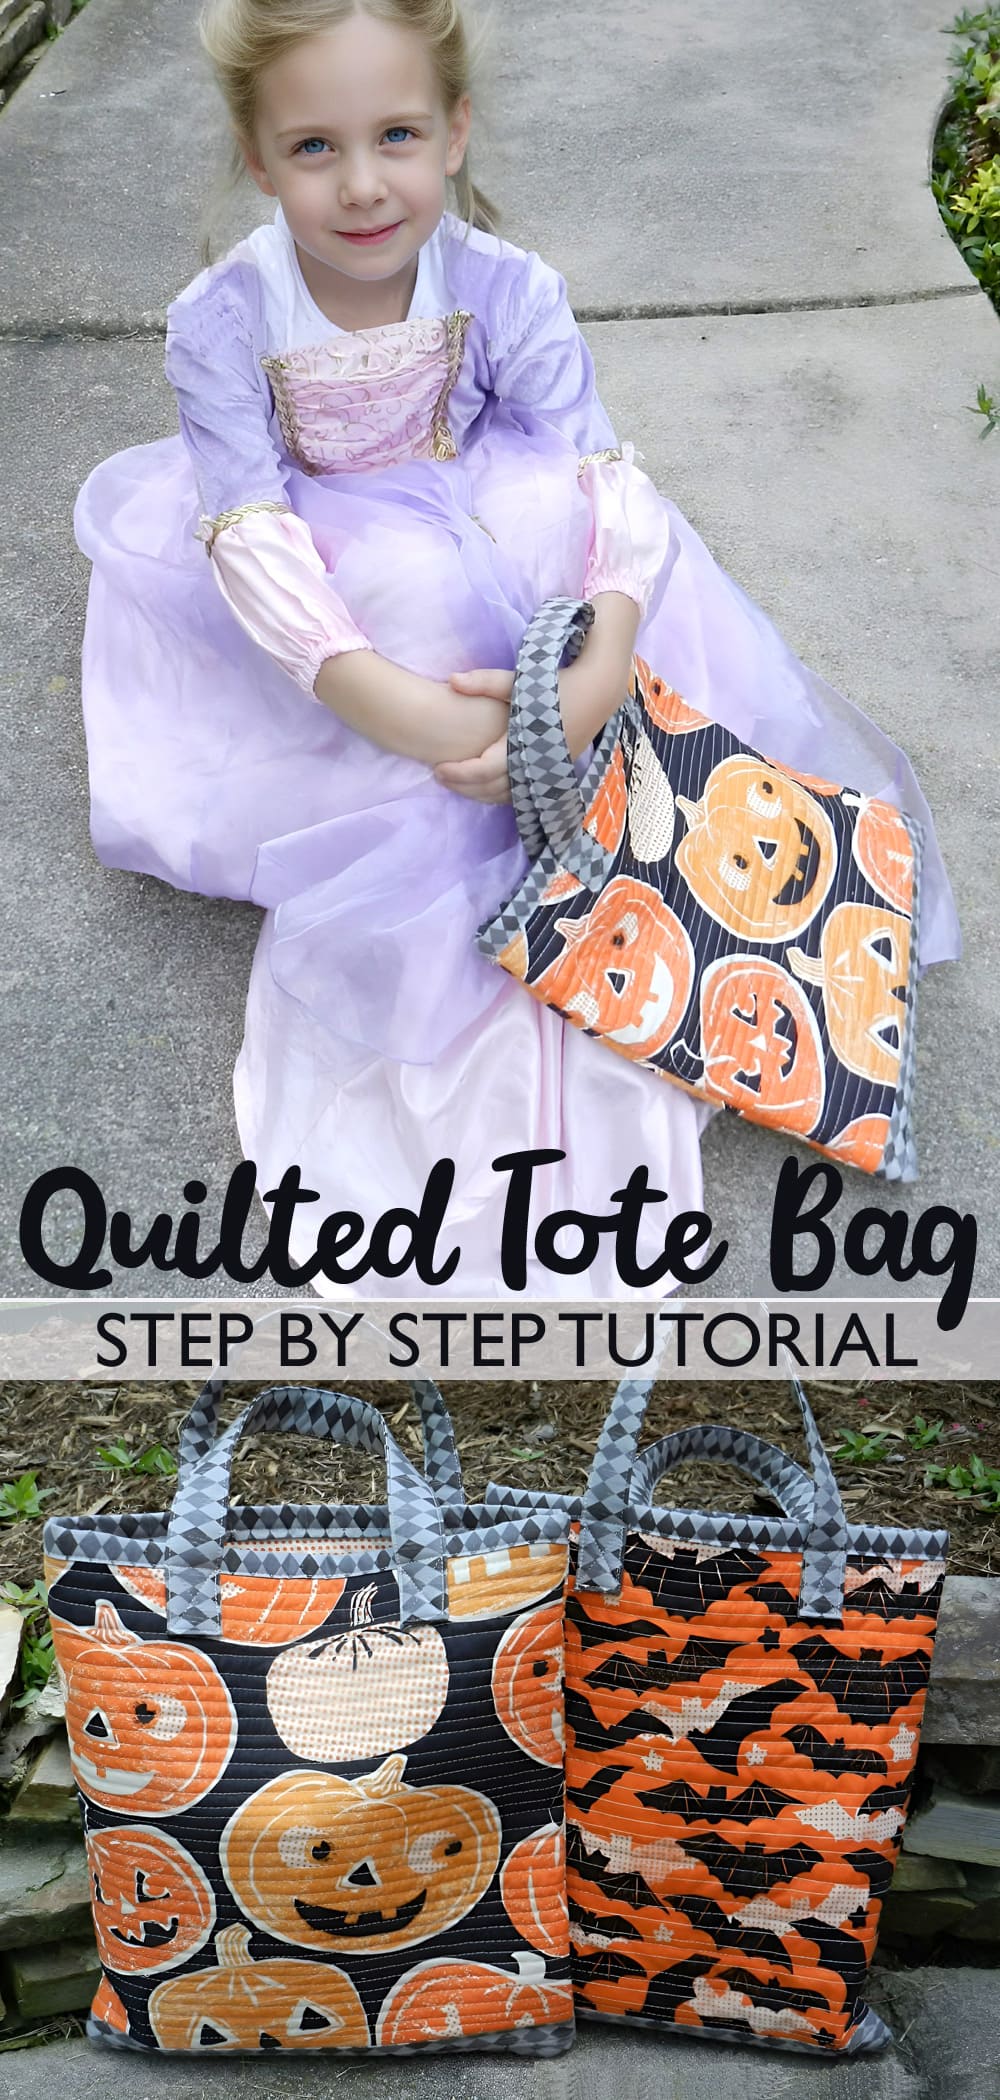 Quilted Tote Bag Tutorial & Pattern